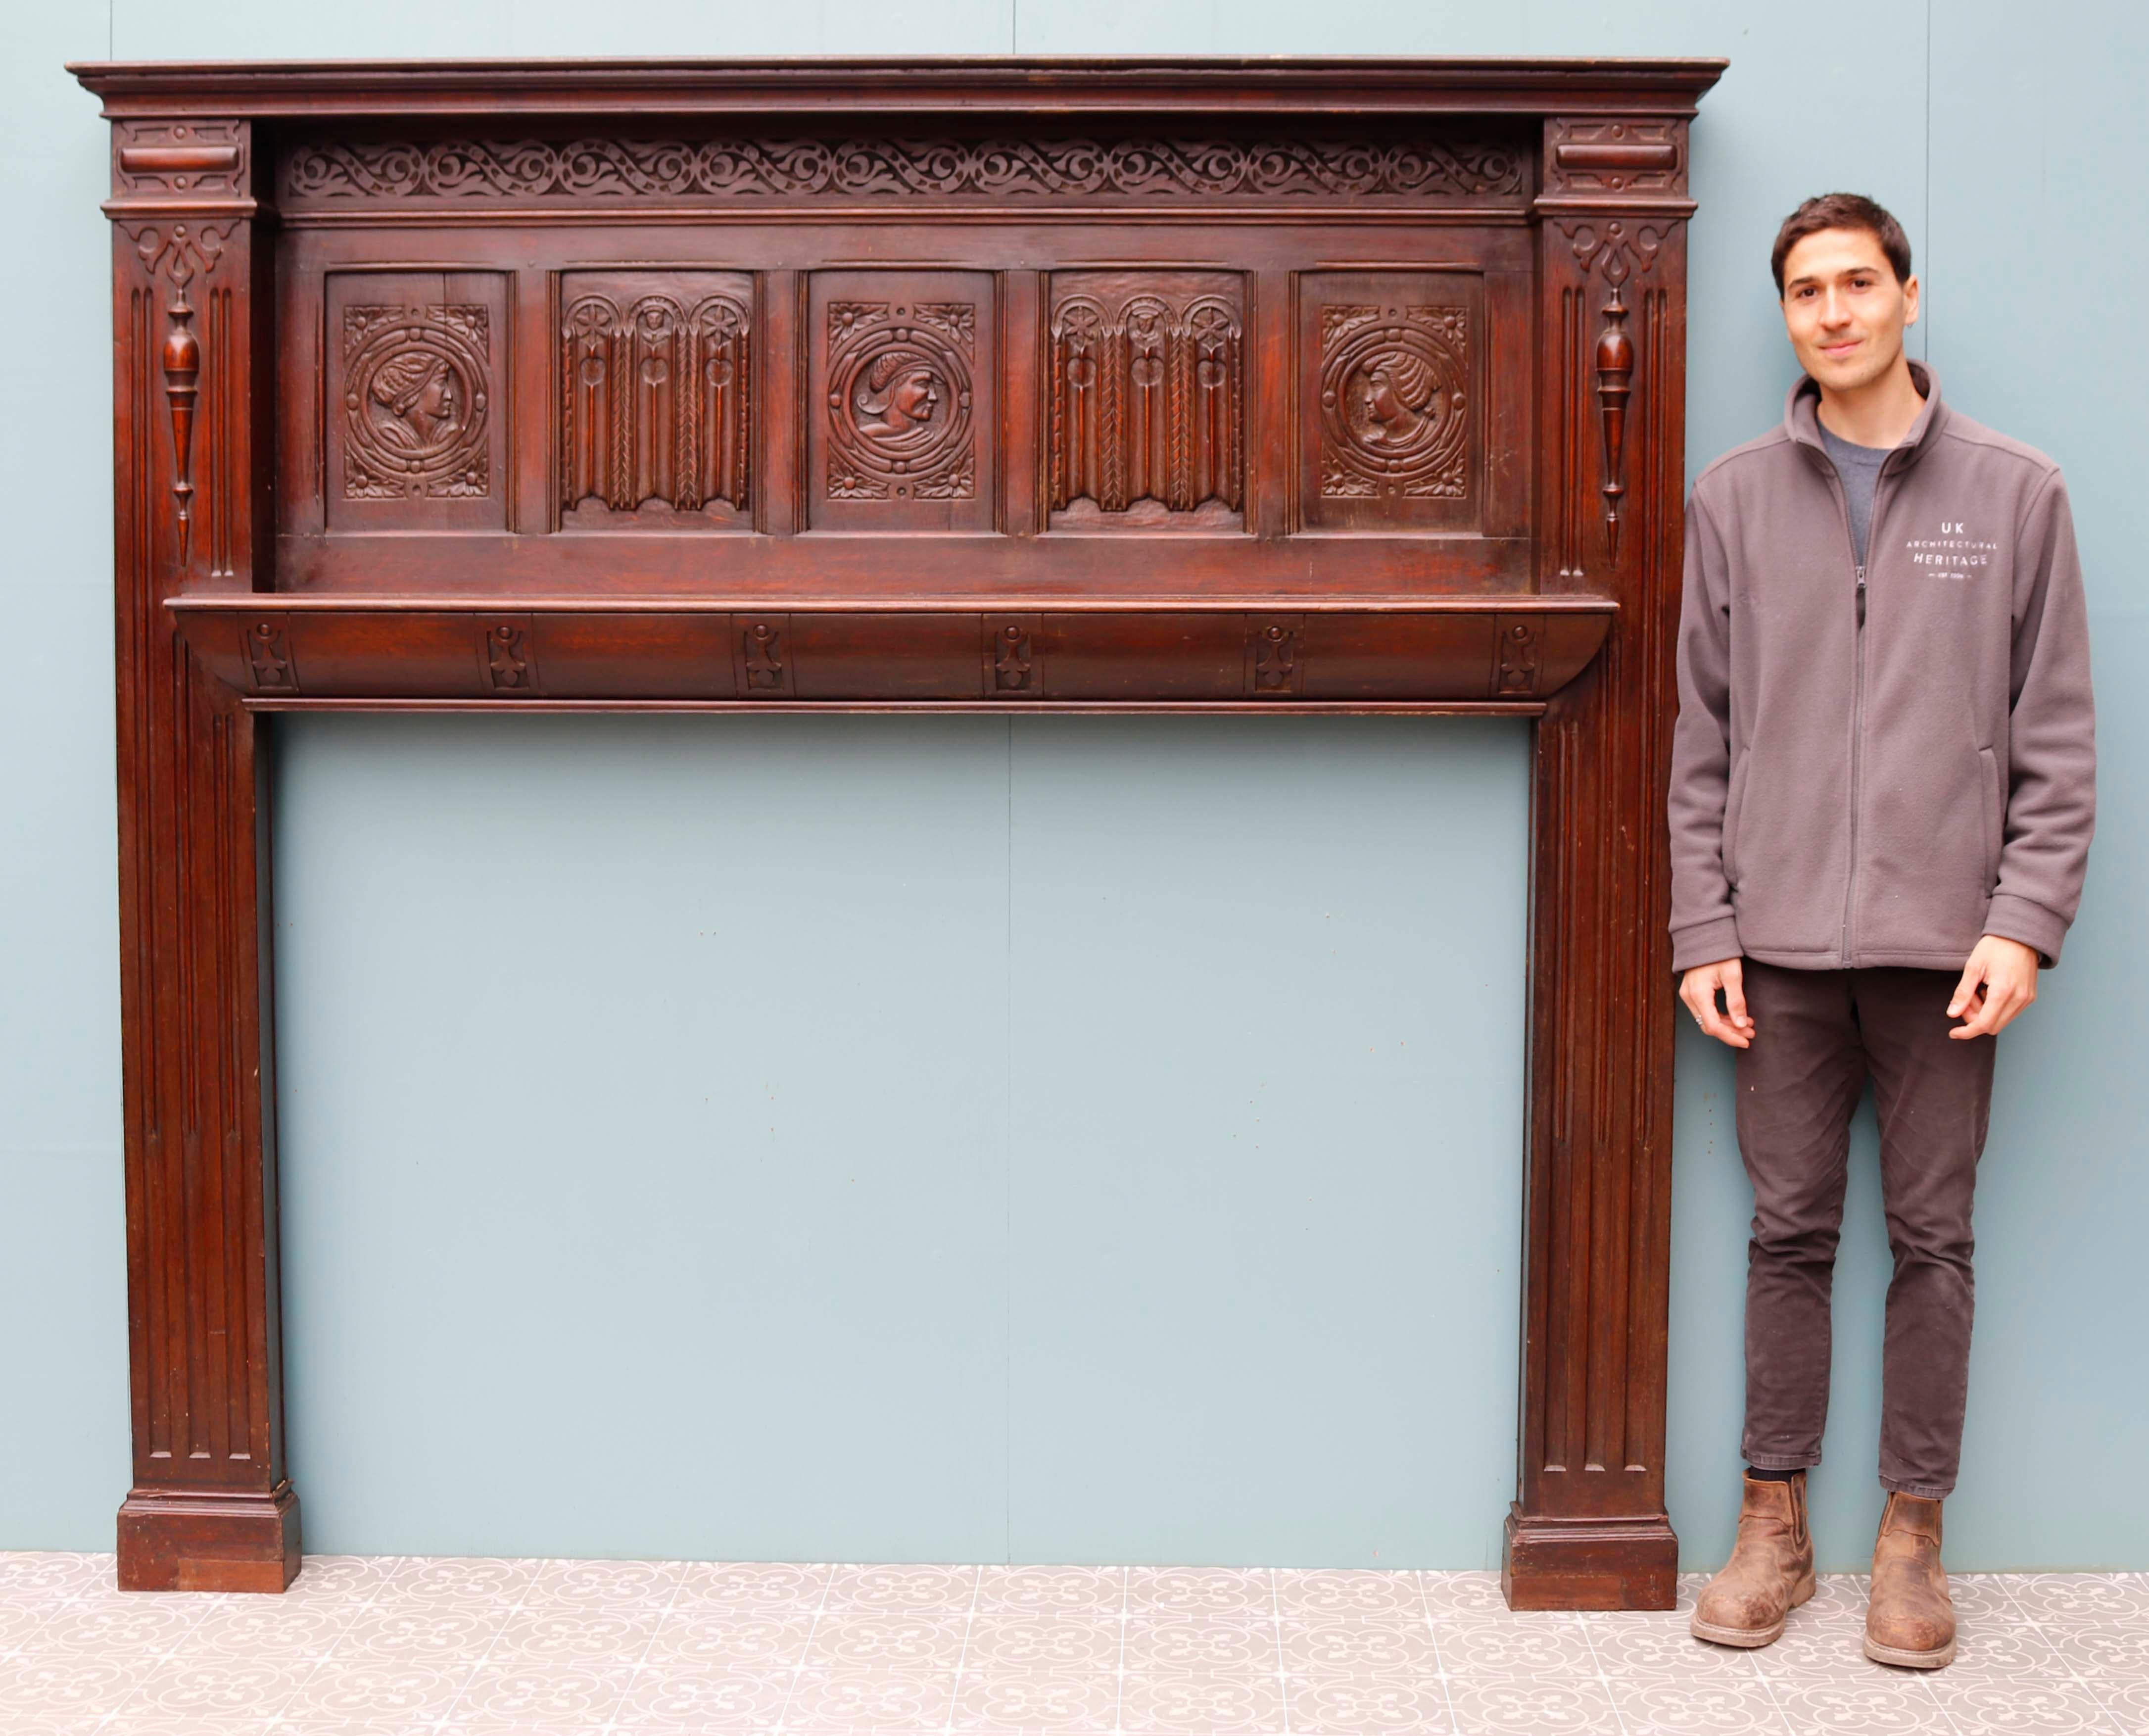 Large English Jacobean style carved oak fireplace. The frieze panel carved with stylised heads.

Additional Dimensions 

Opening Height 118 cm

Opening Width 167.5 cm

Width between outsides of the foot blocks 208.5 c.